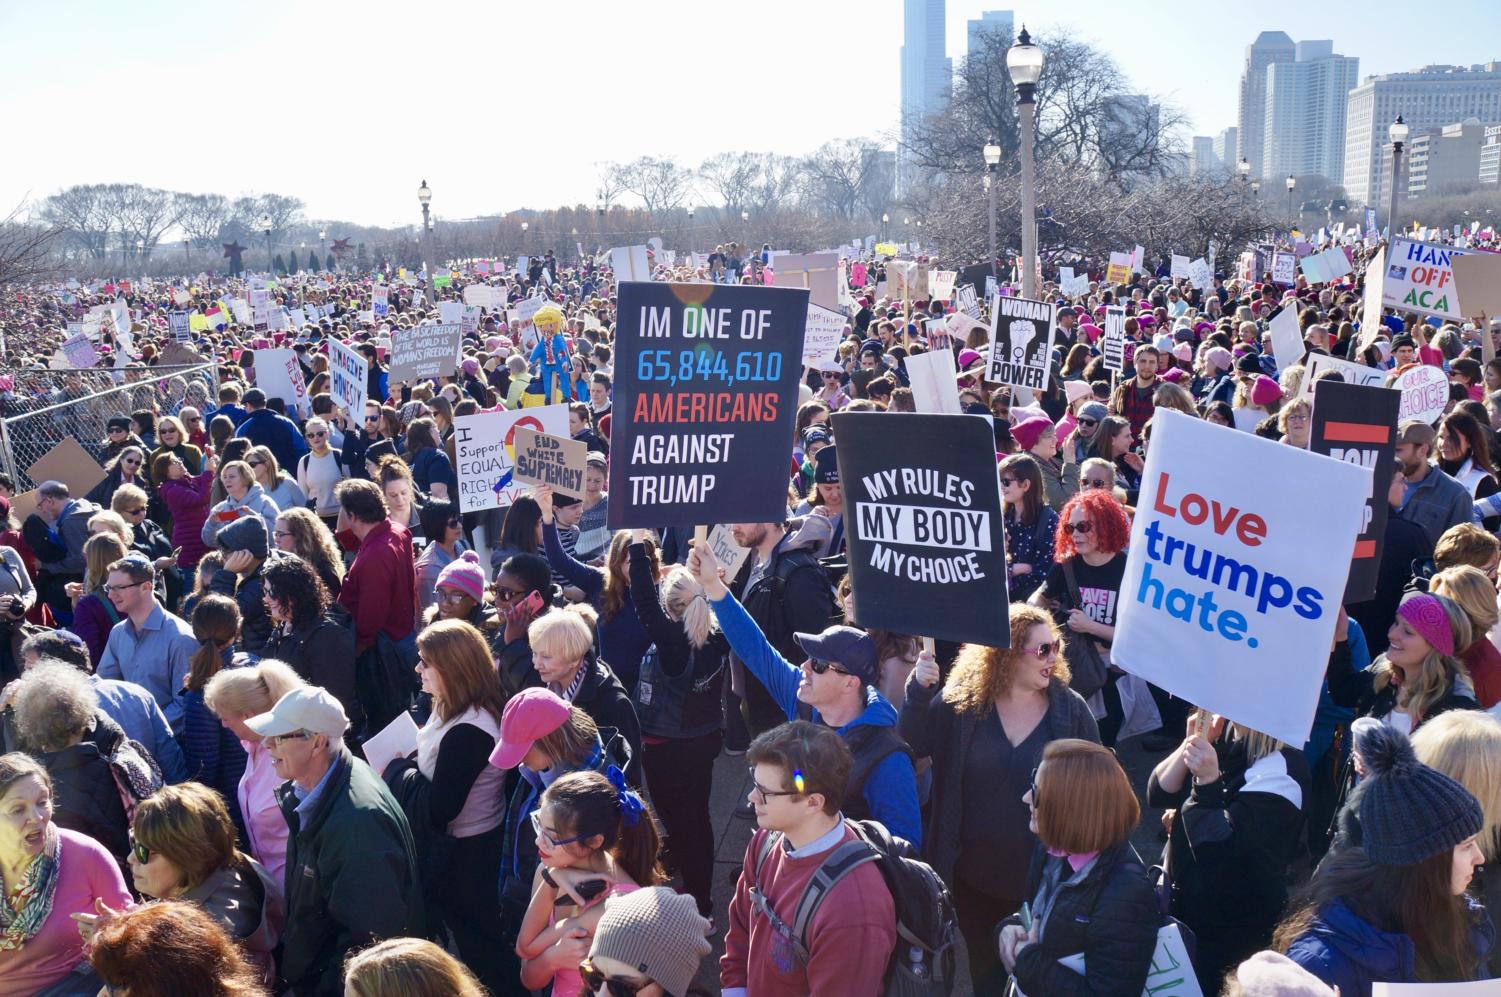 Over 250,000 people made their way to Grant Park for a rally before the Women’s March in Chicago on Janurary 21st.